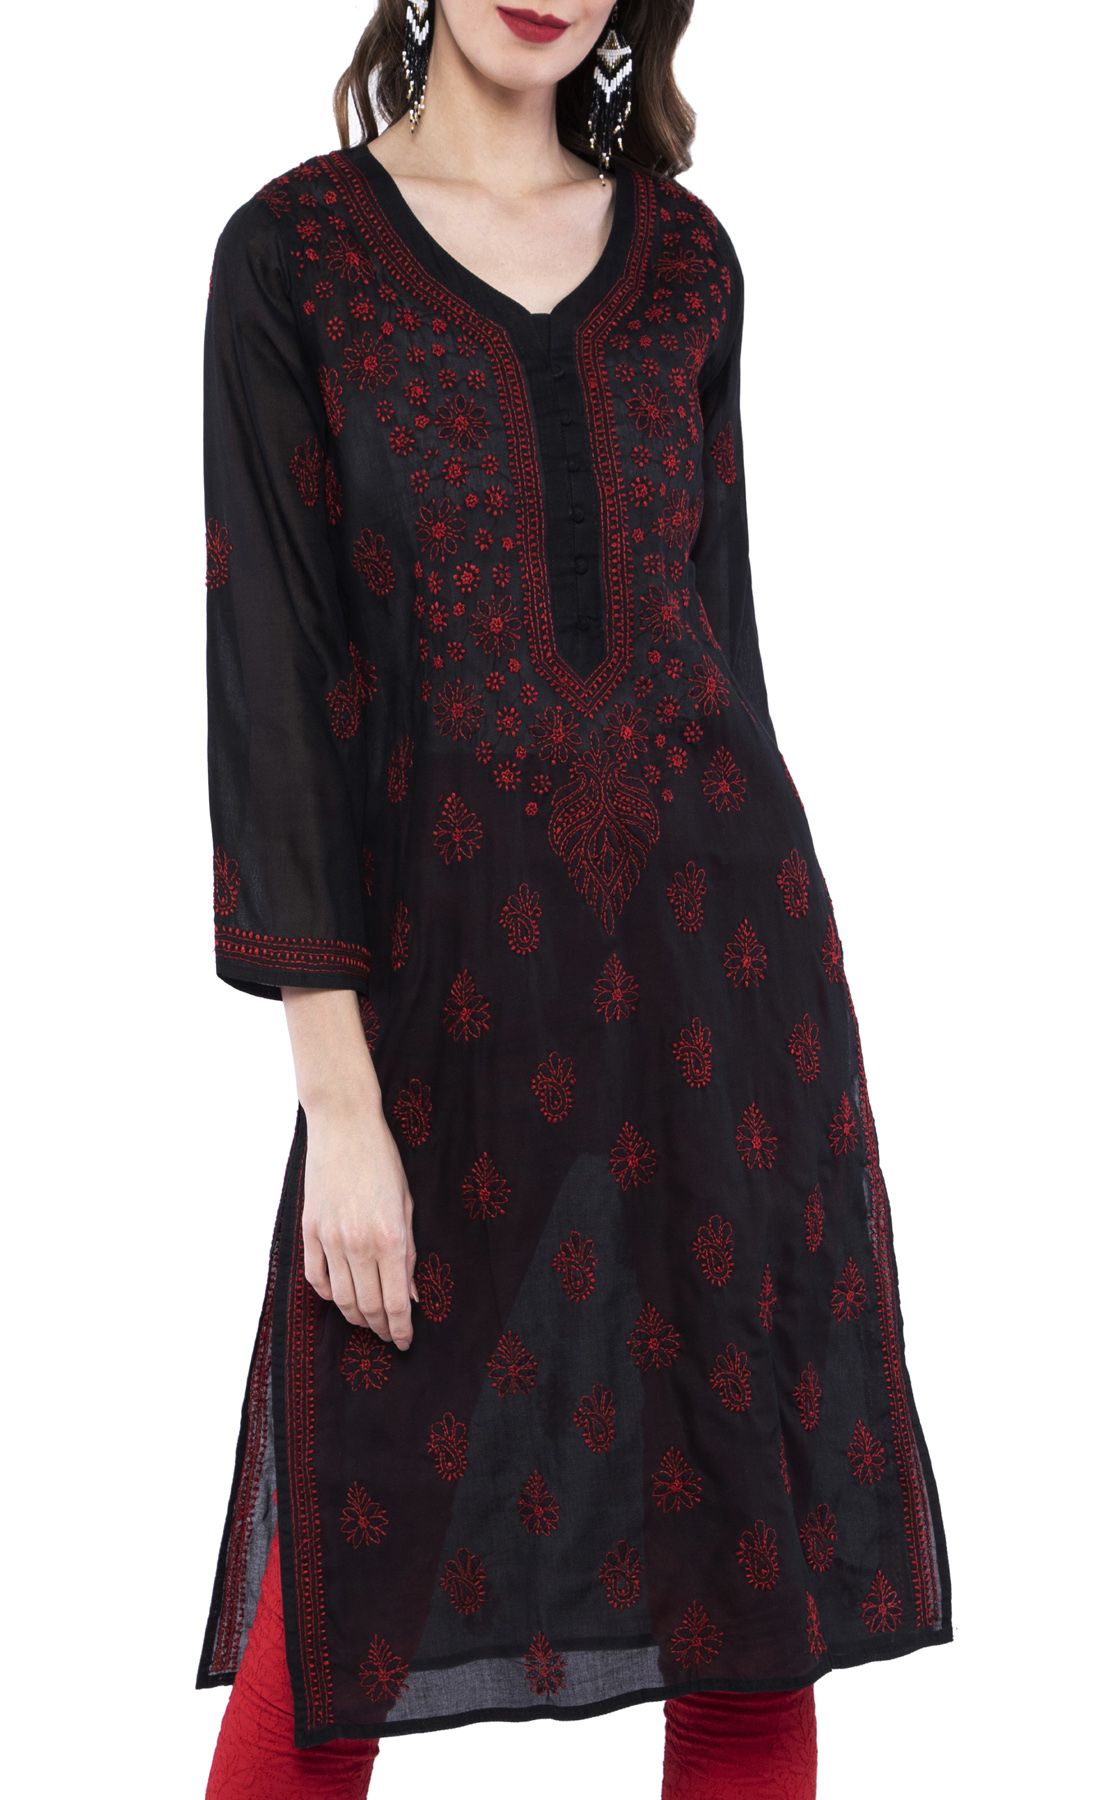 Chic and Comfortable: Chikan Kurtis for Effortless Style